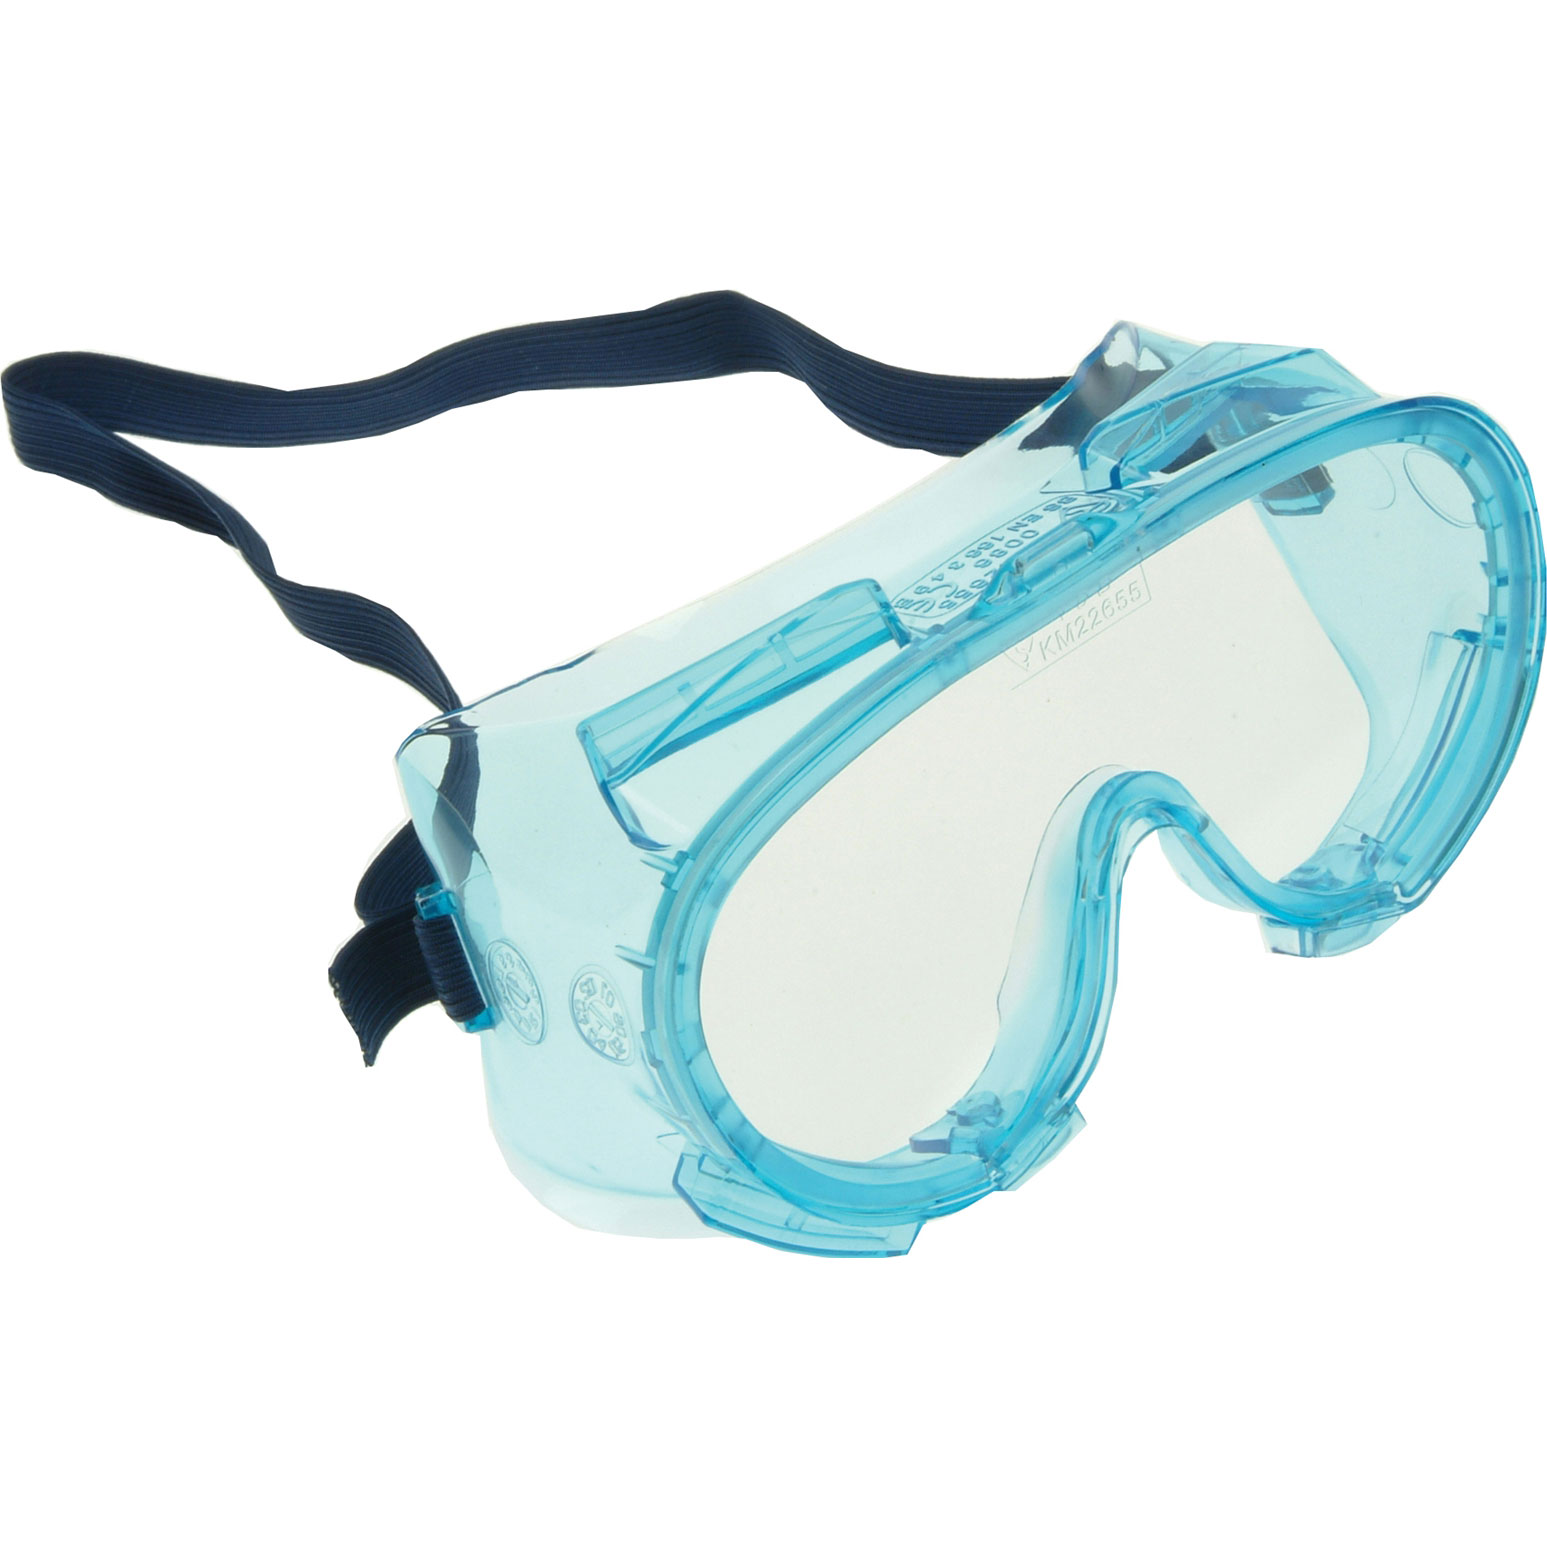 Image of Vitrex Safety Goggles